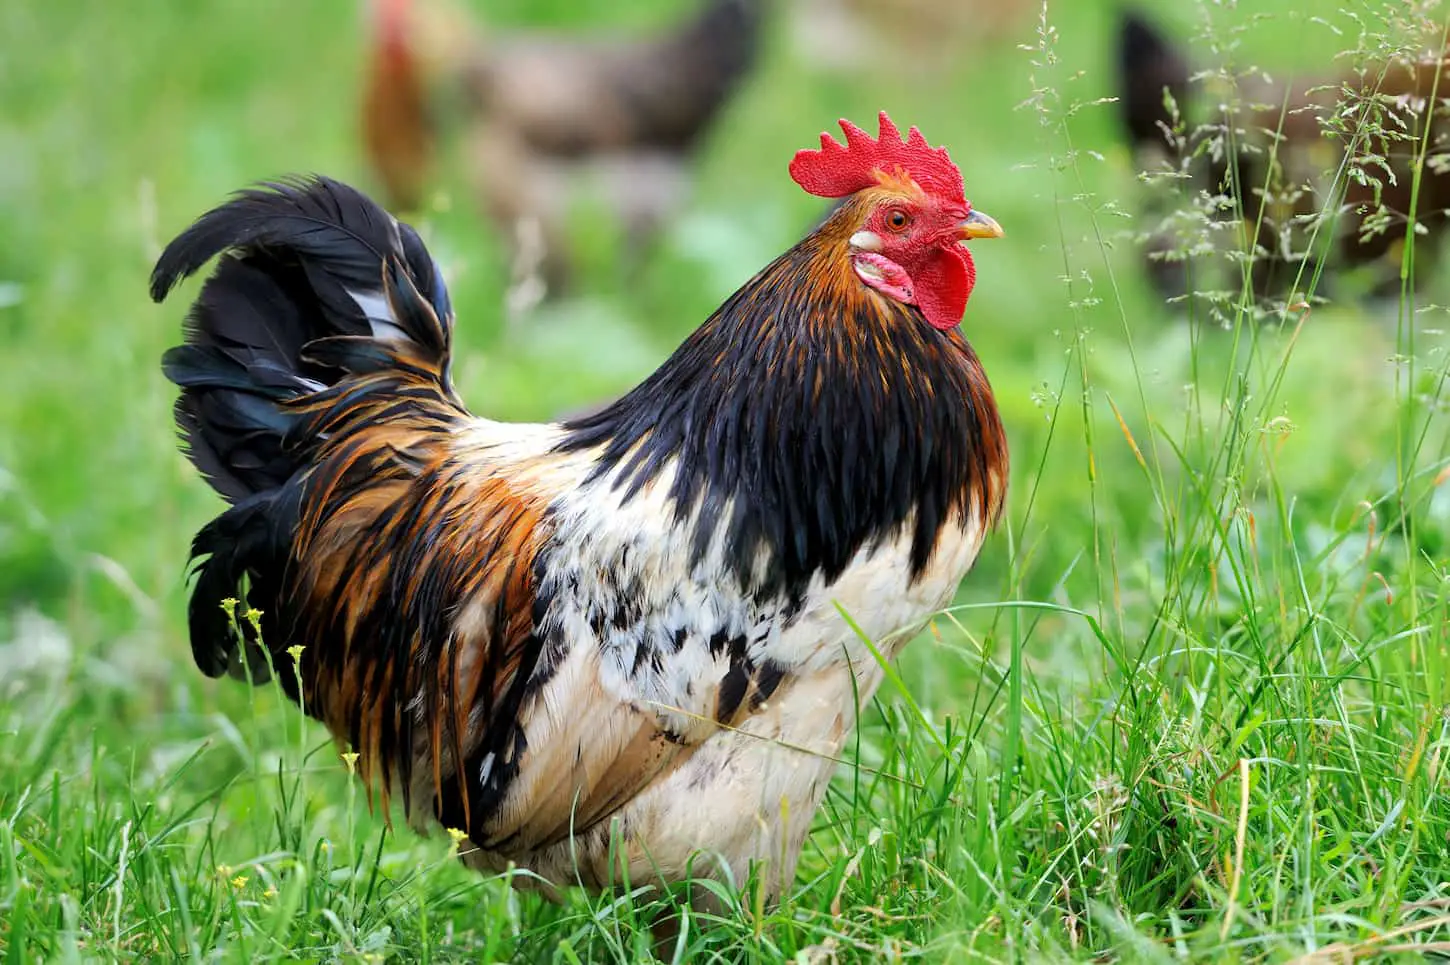 An image of a rooster in a farm background.